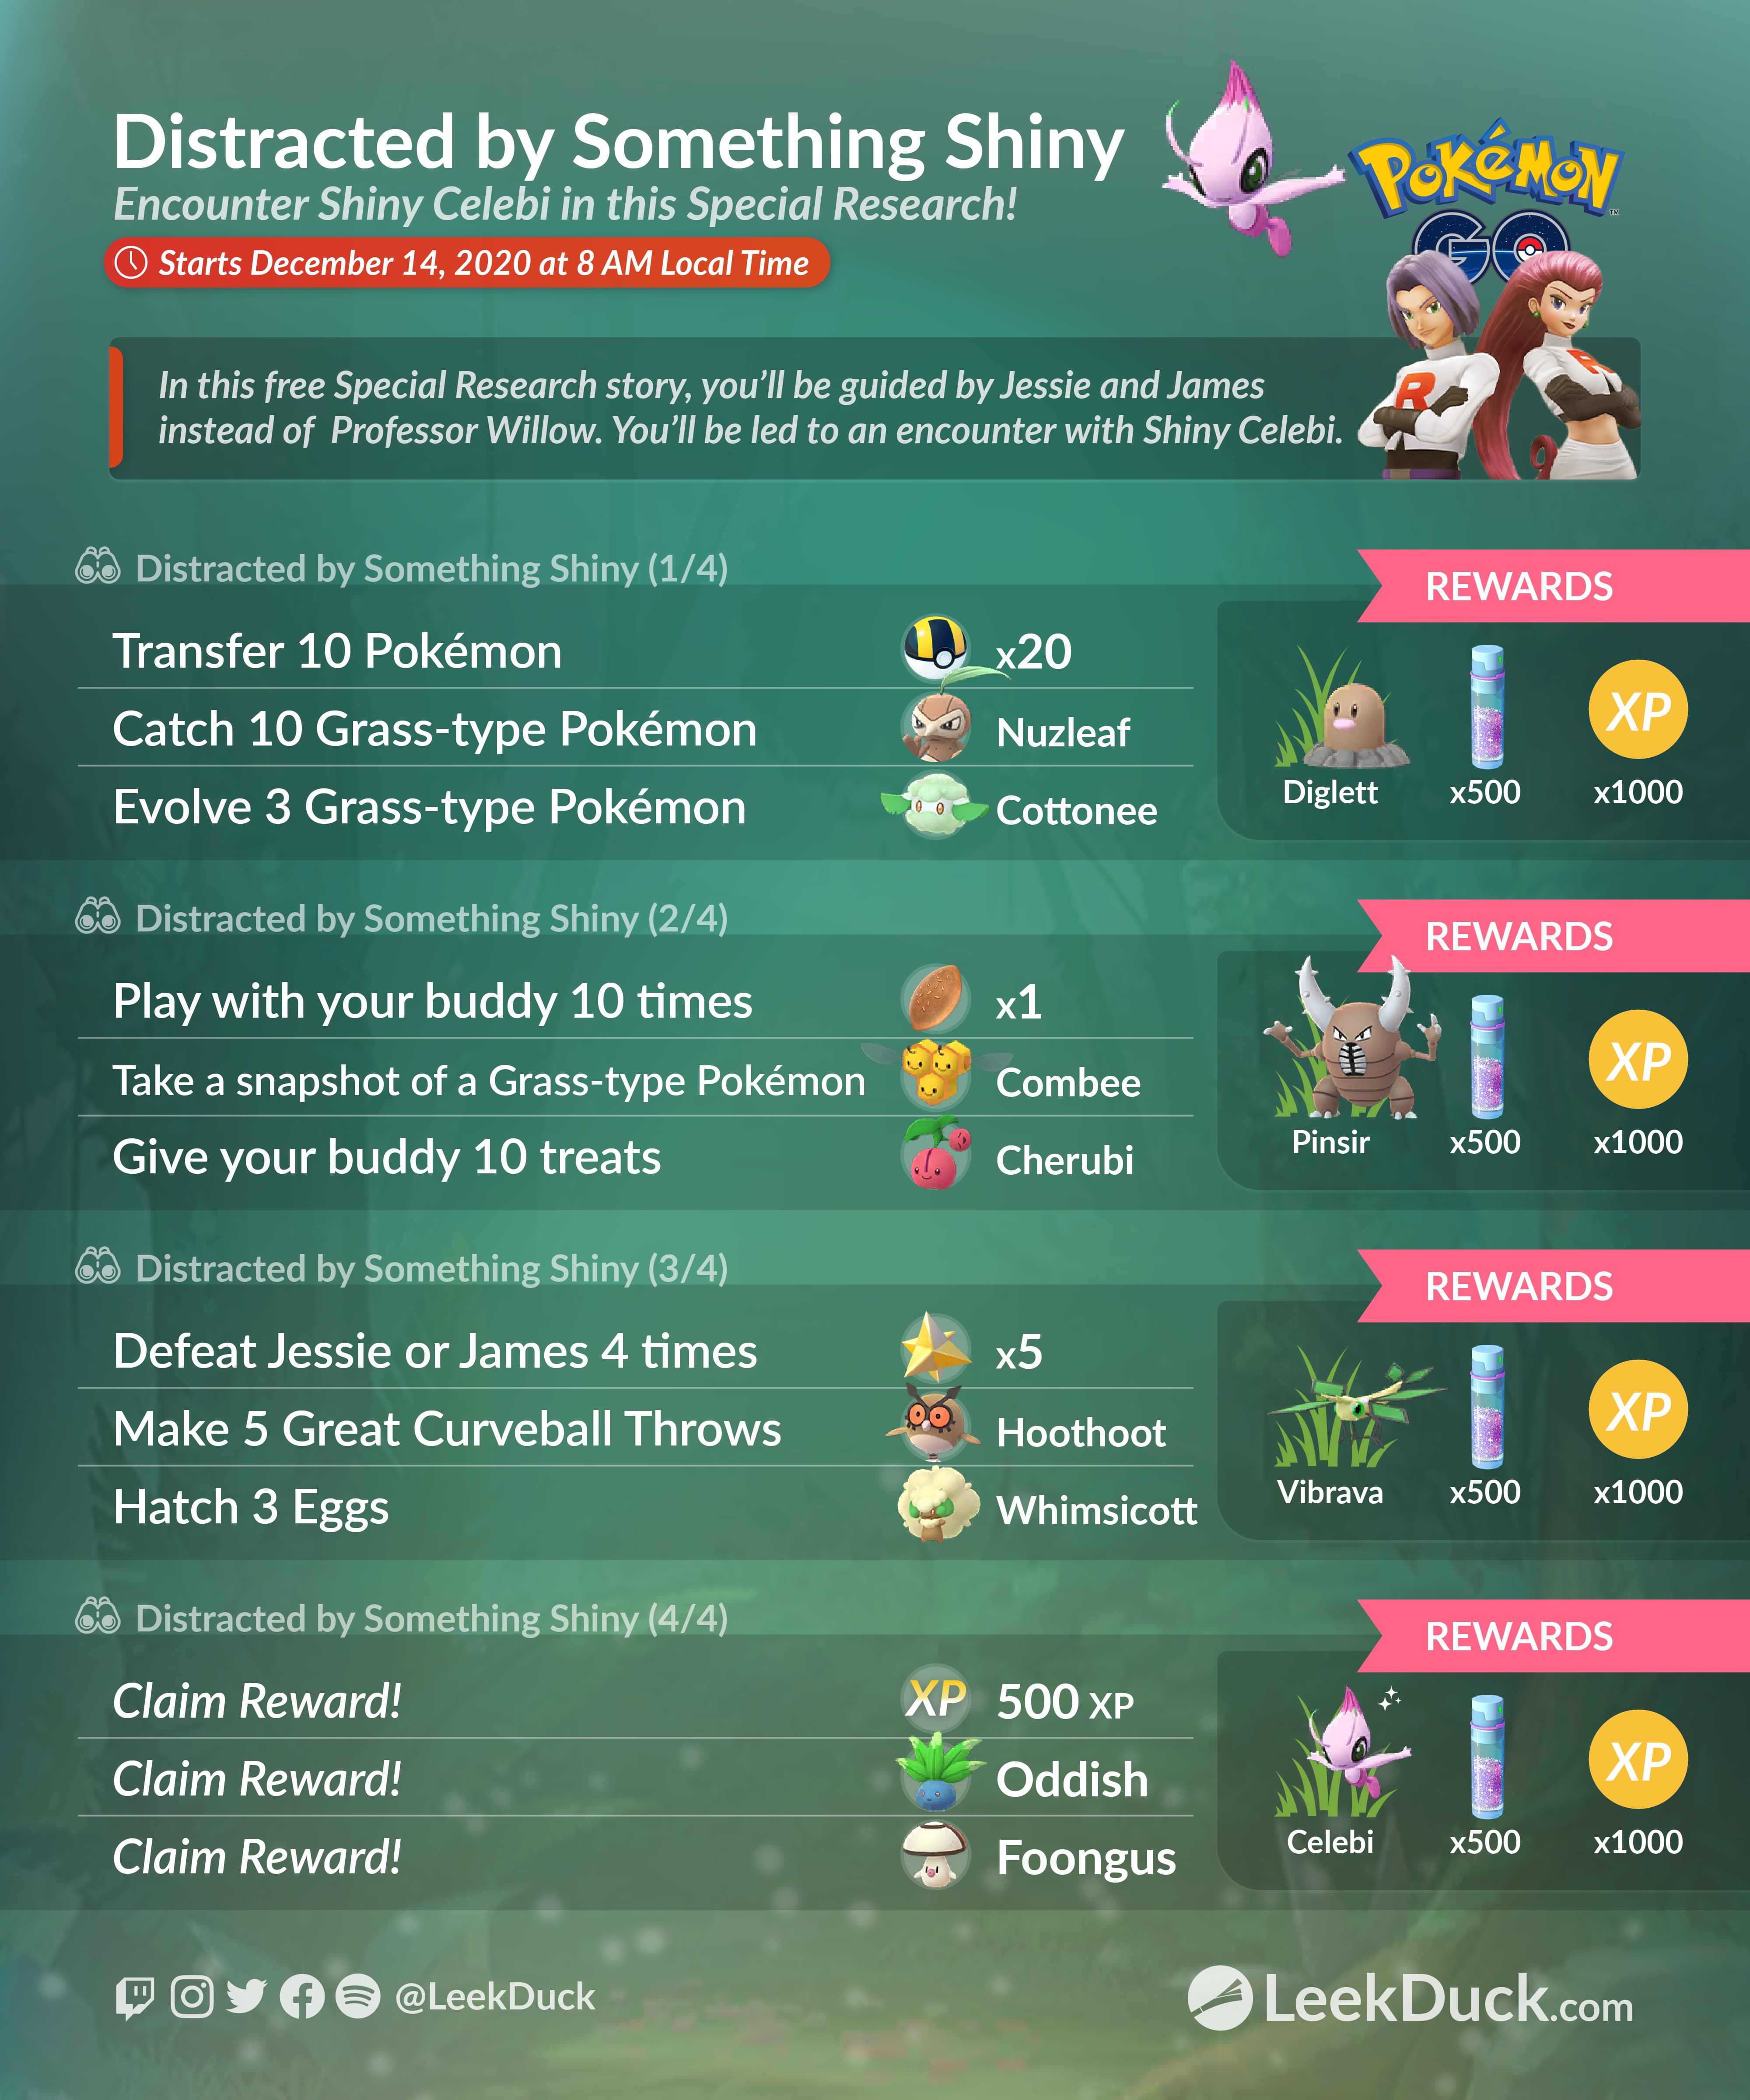 Secrets Of The Jungle Event Leek Duck Pokemon Go News And Resources